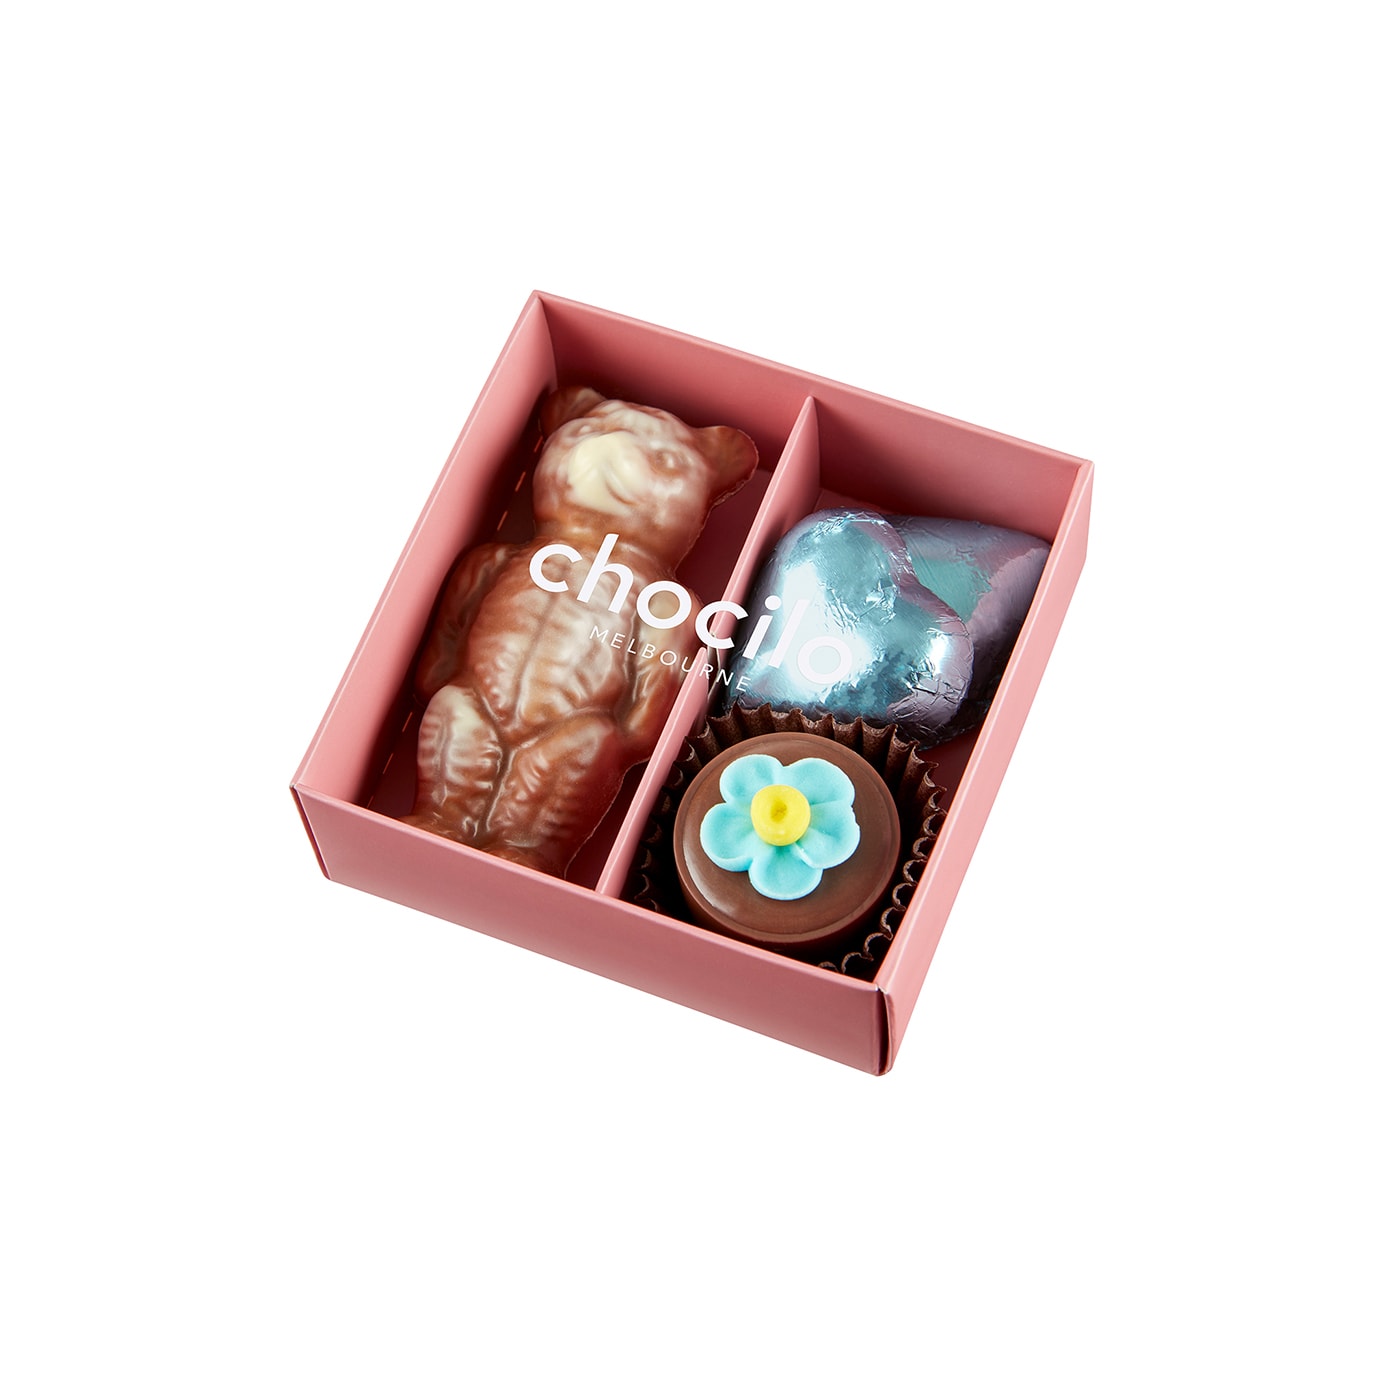 Chocilo Melbourne marbled chocolate bear, ice blue foiled milk chocolate hearts, and chocolate praline flower pot 4 pack gift box